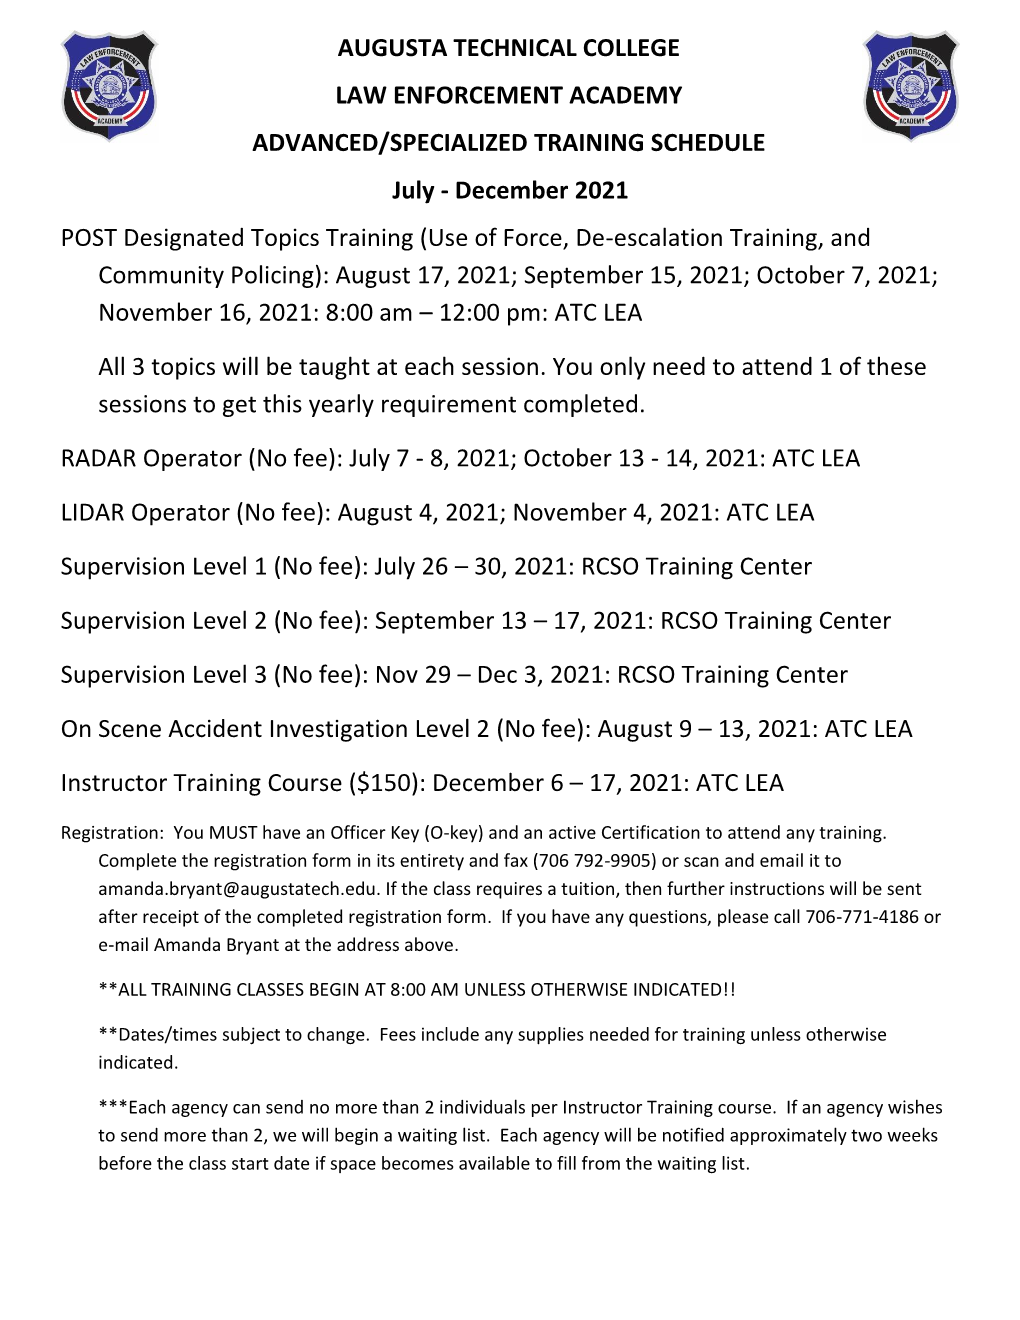 Advanced/Specialized Training Schedule